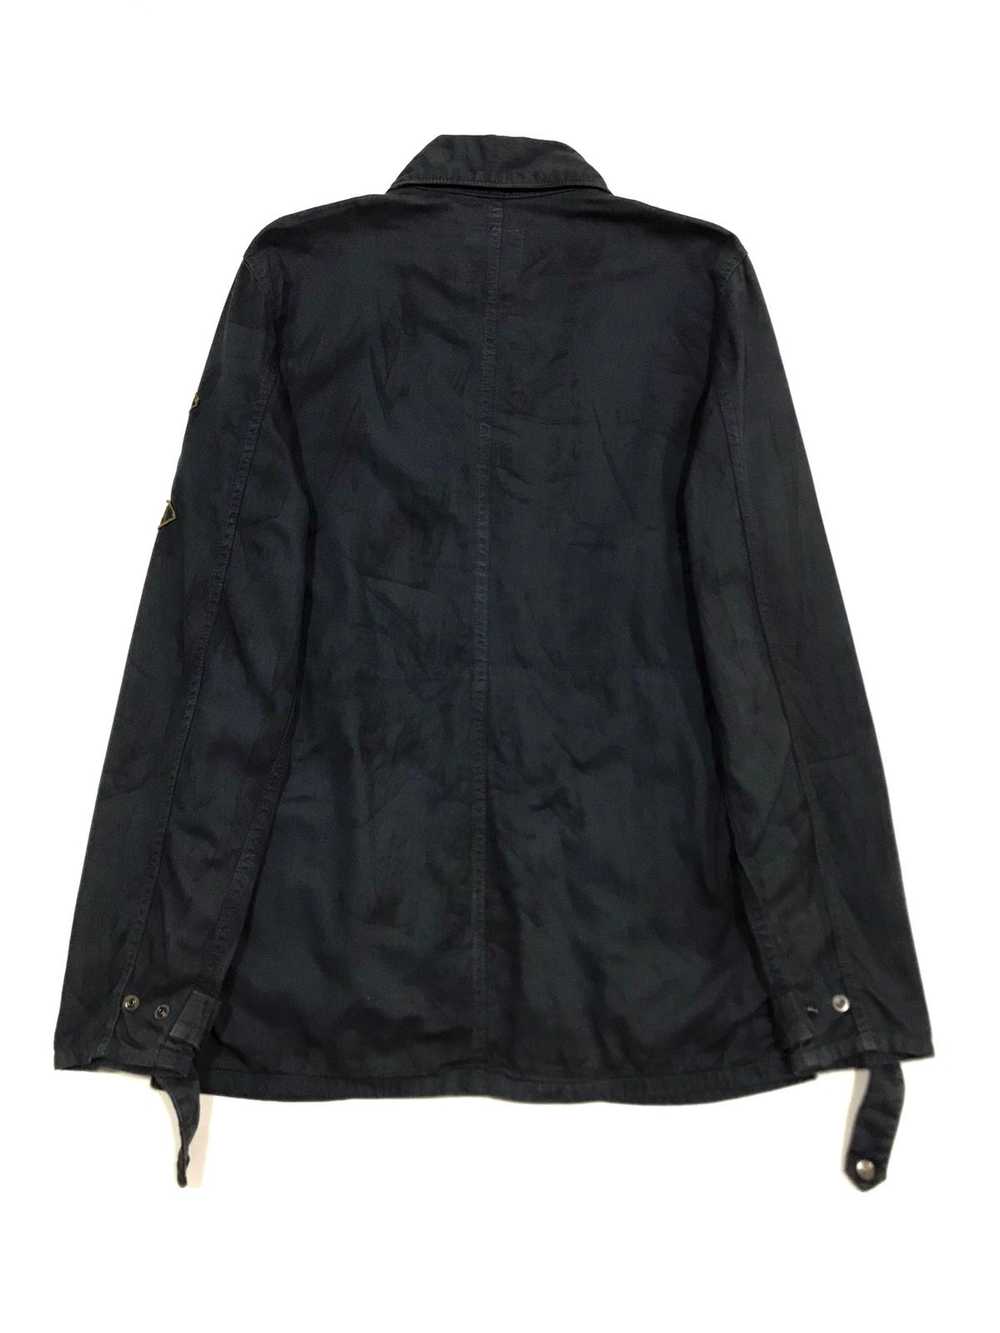 Hysteric Glamour HG “Dirty” Oil Spilled Jacket - image 2